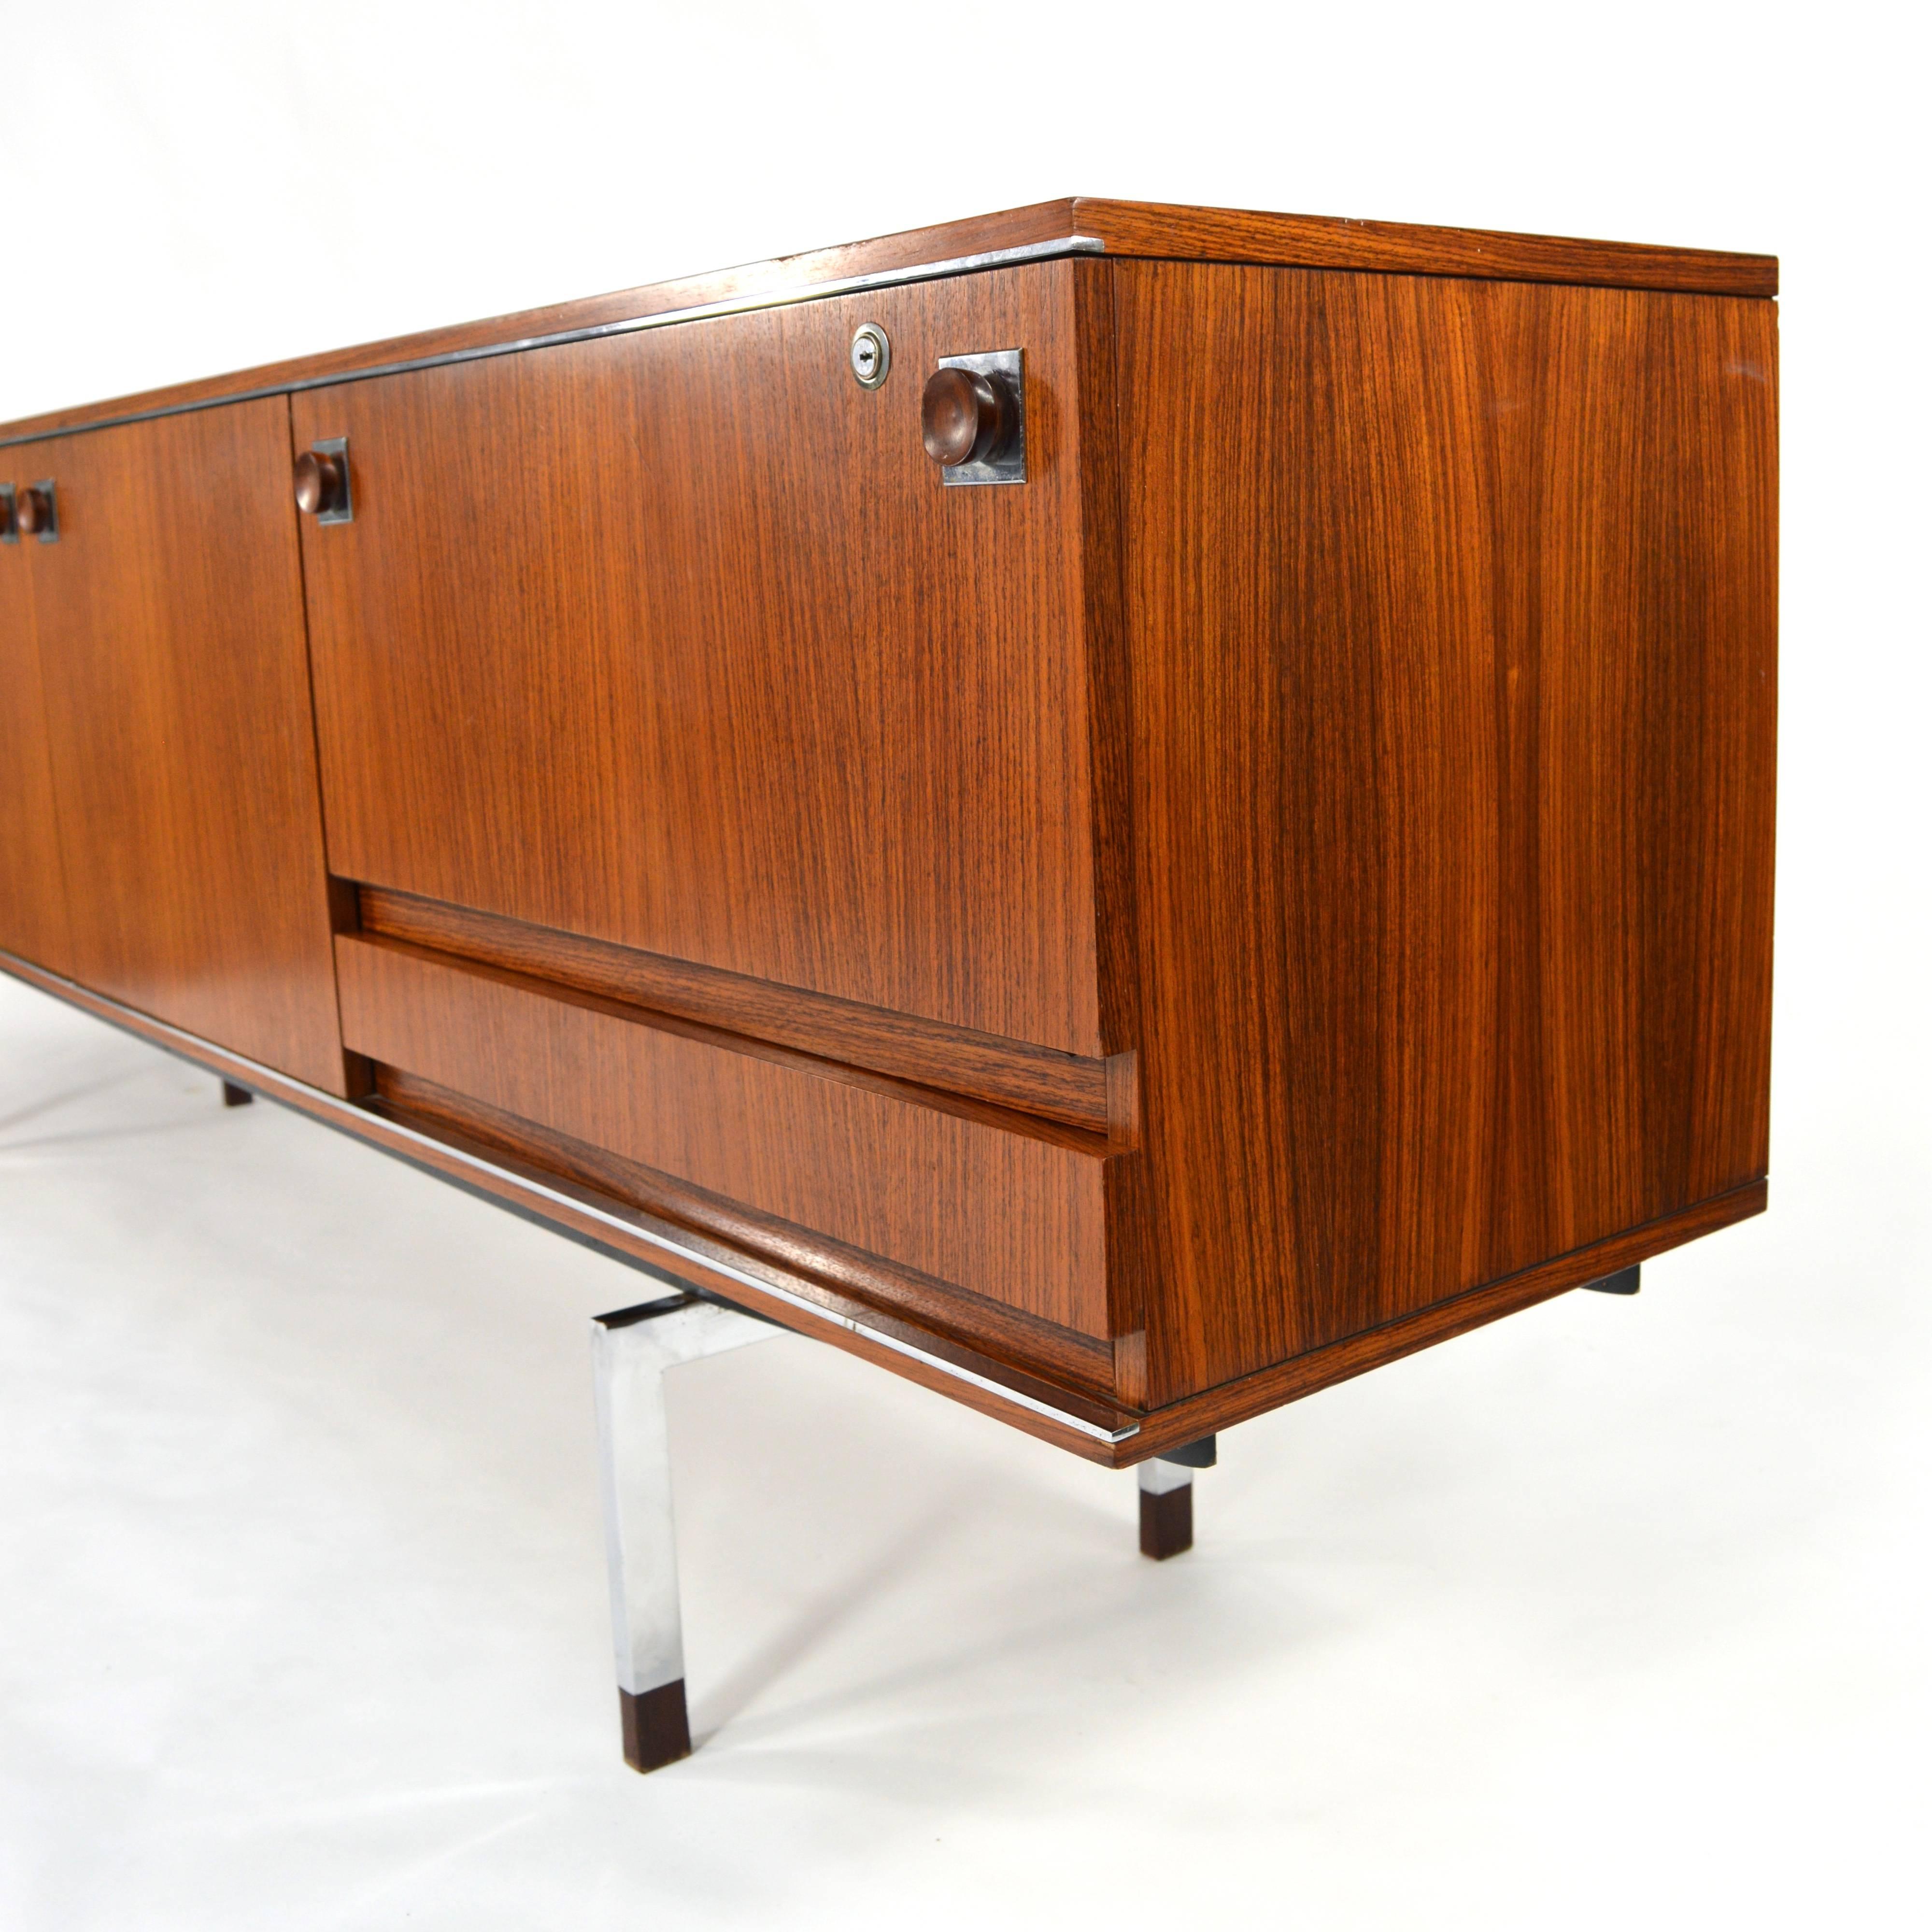 Mid-20th Century Large Alfred Hendrickx for Belform Sideboard, Belgium, circa 1950